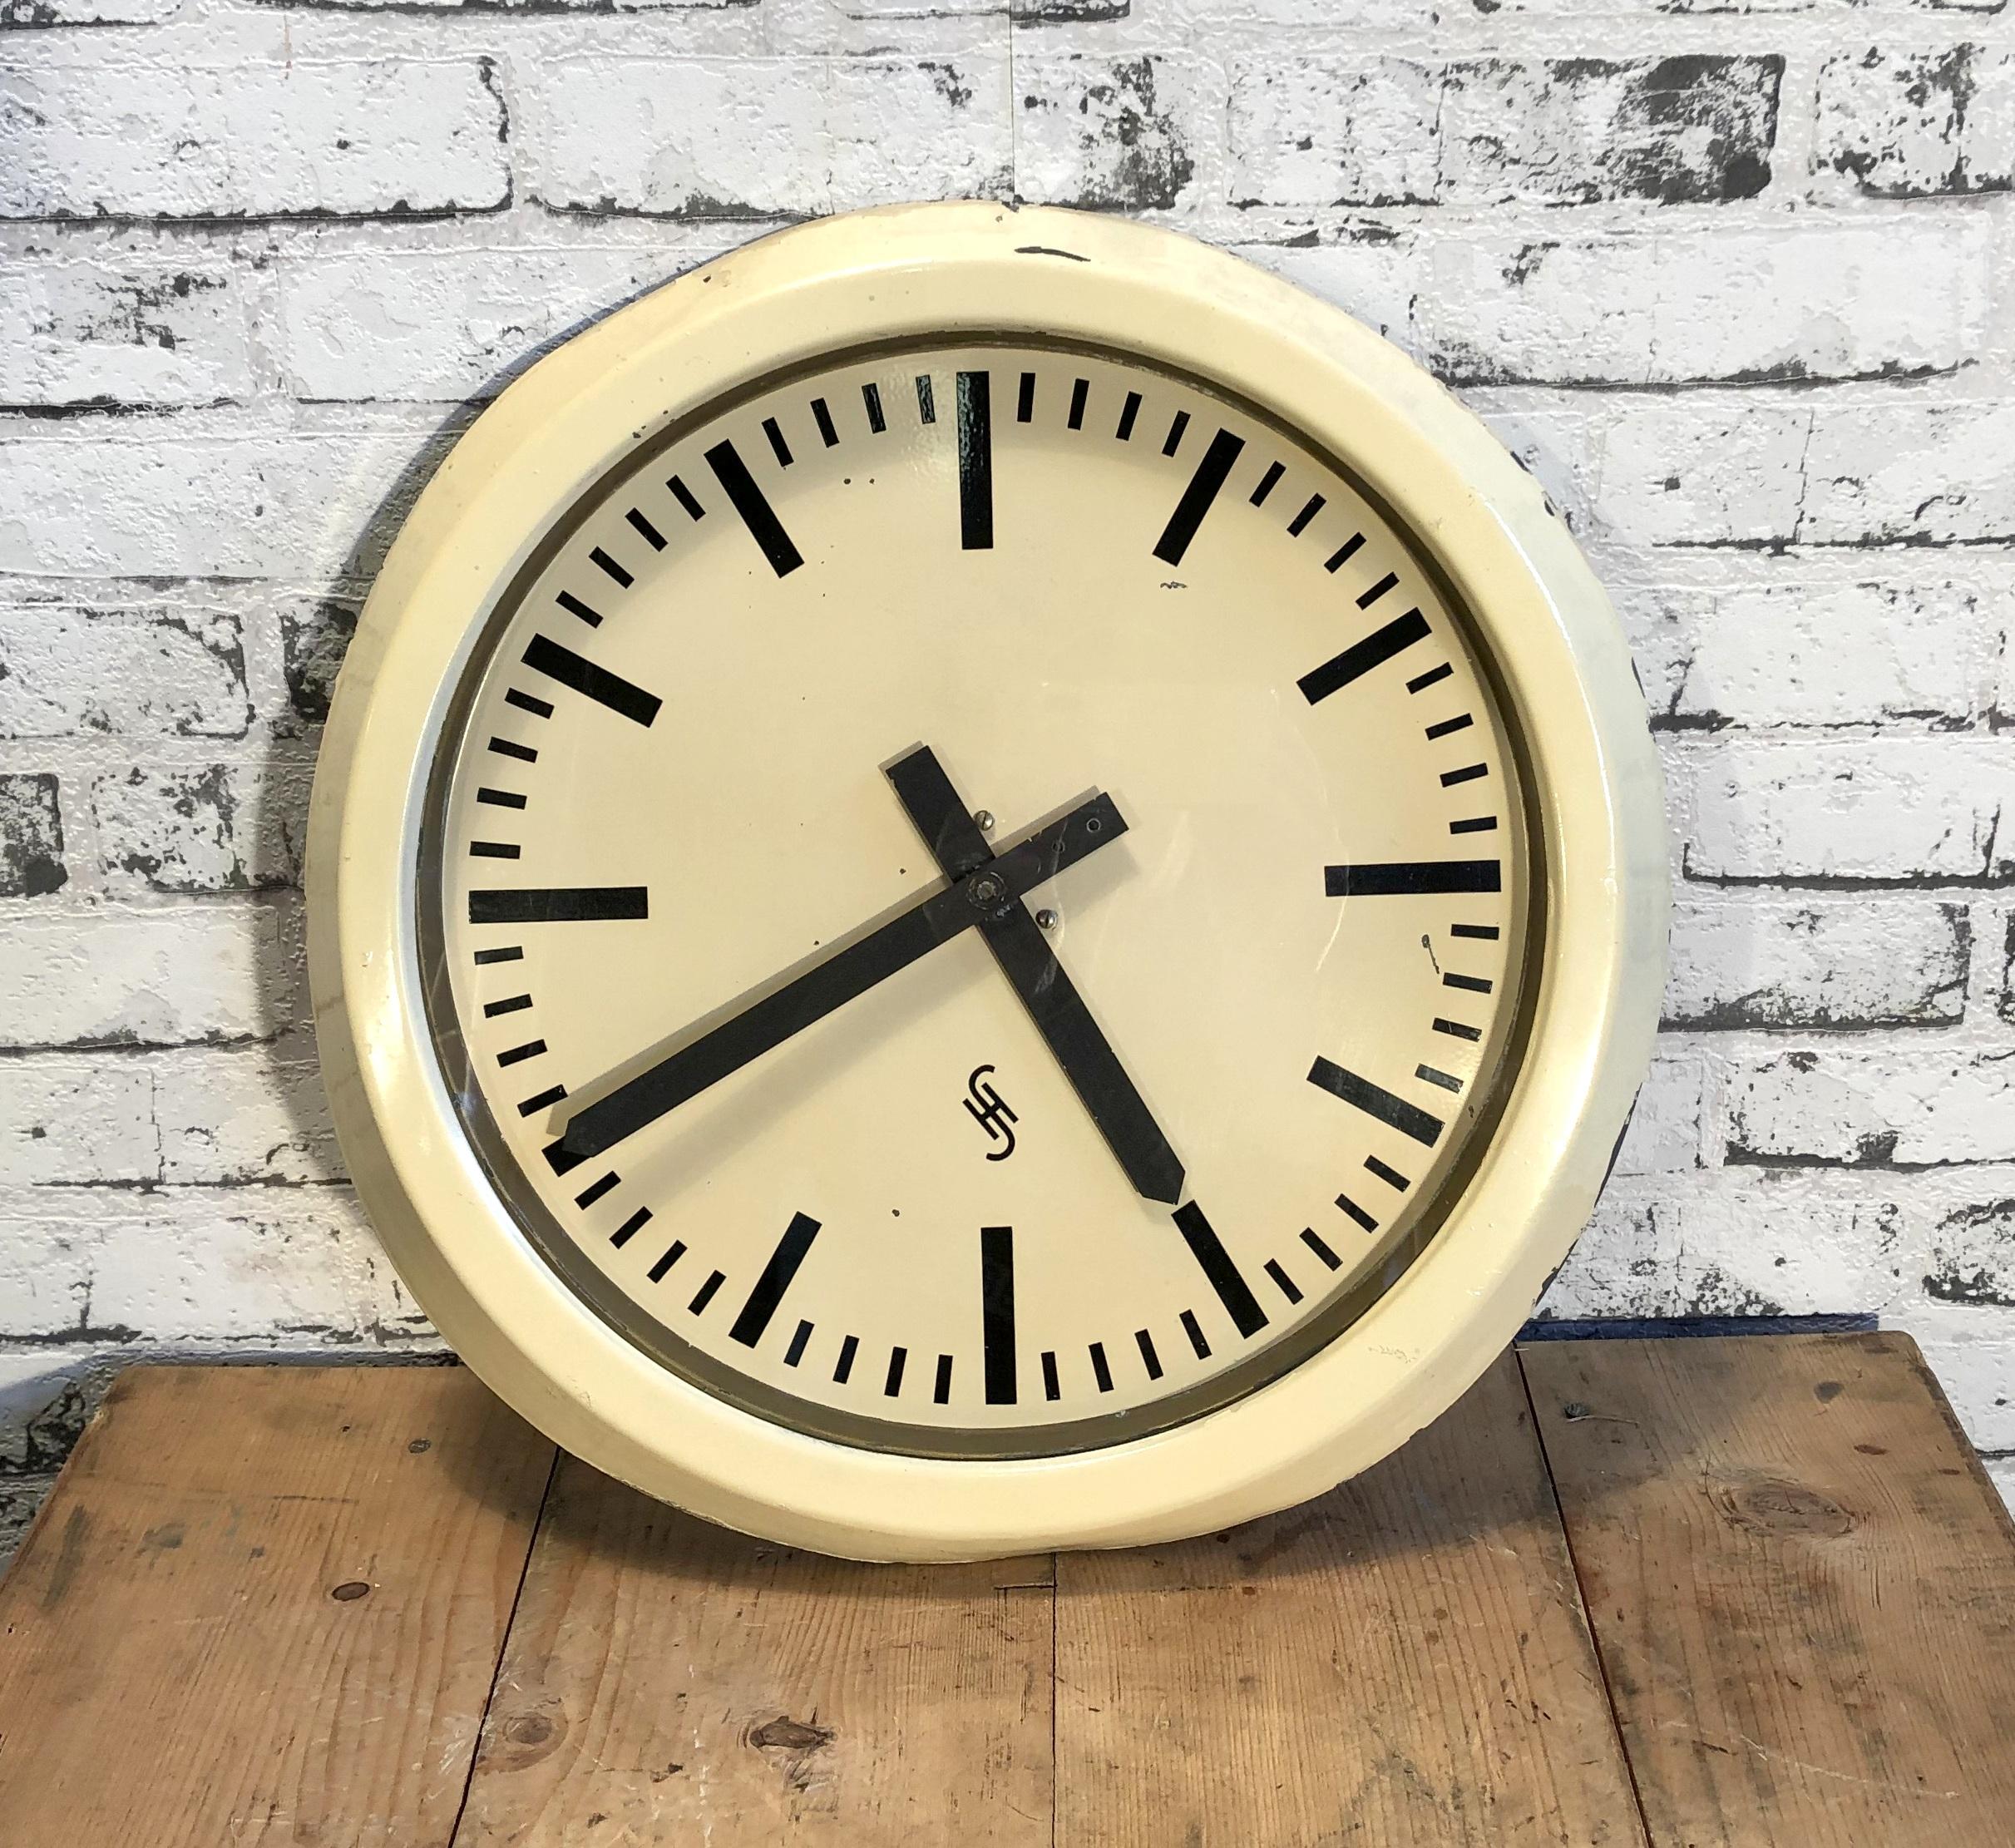 This large wall clock was produced by Siemens and Halske in Germany during the 1950s. It features a white metal frame, aluminum dial, and a clear glass cover. The piece has been converted into a battery-powered clockwork and requires only one